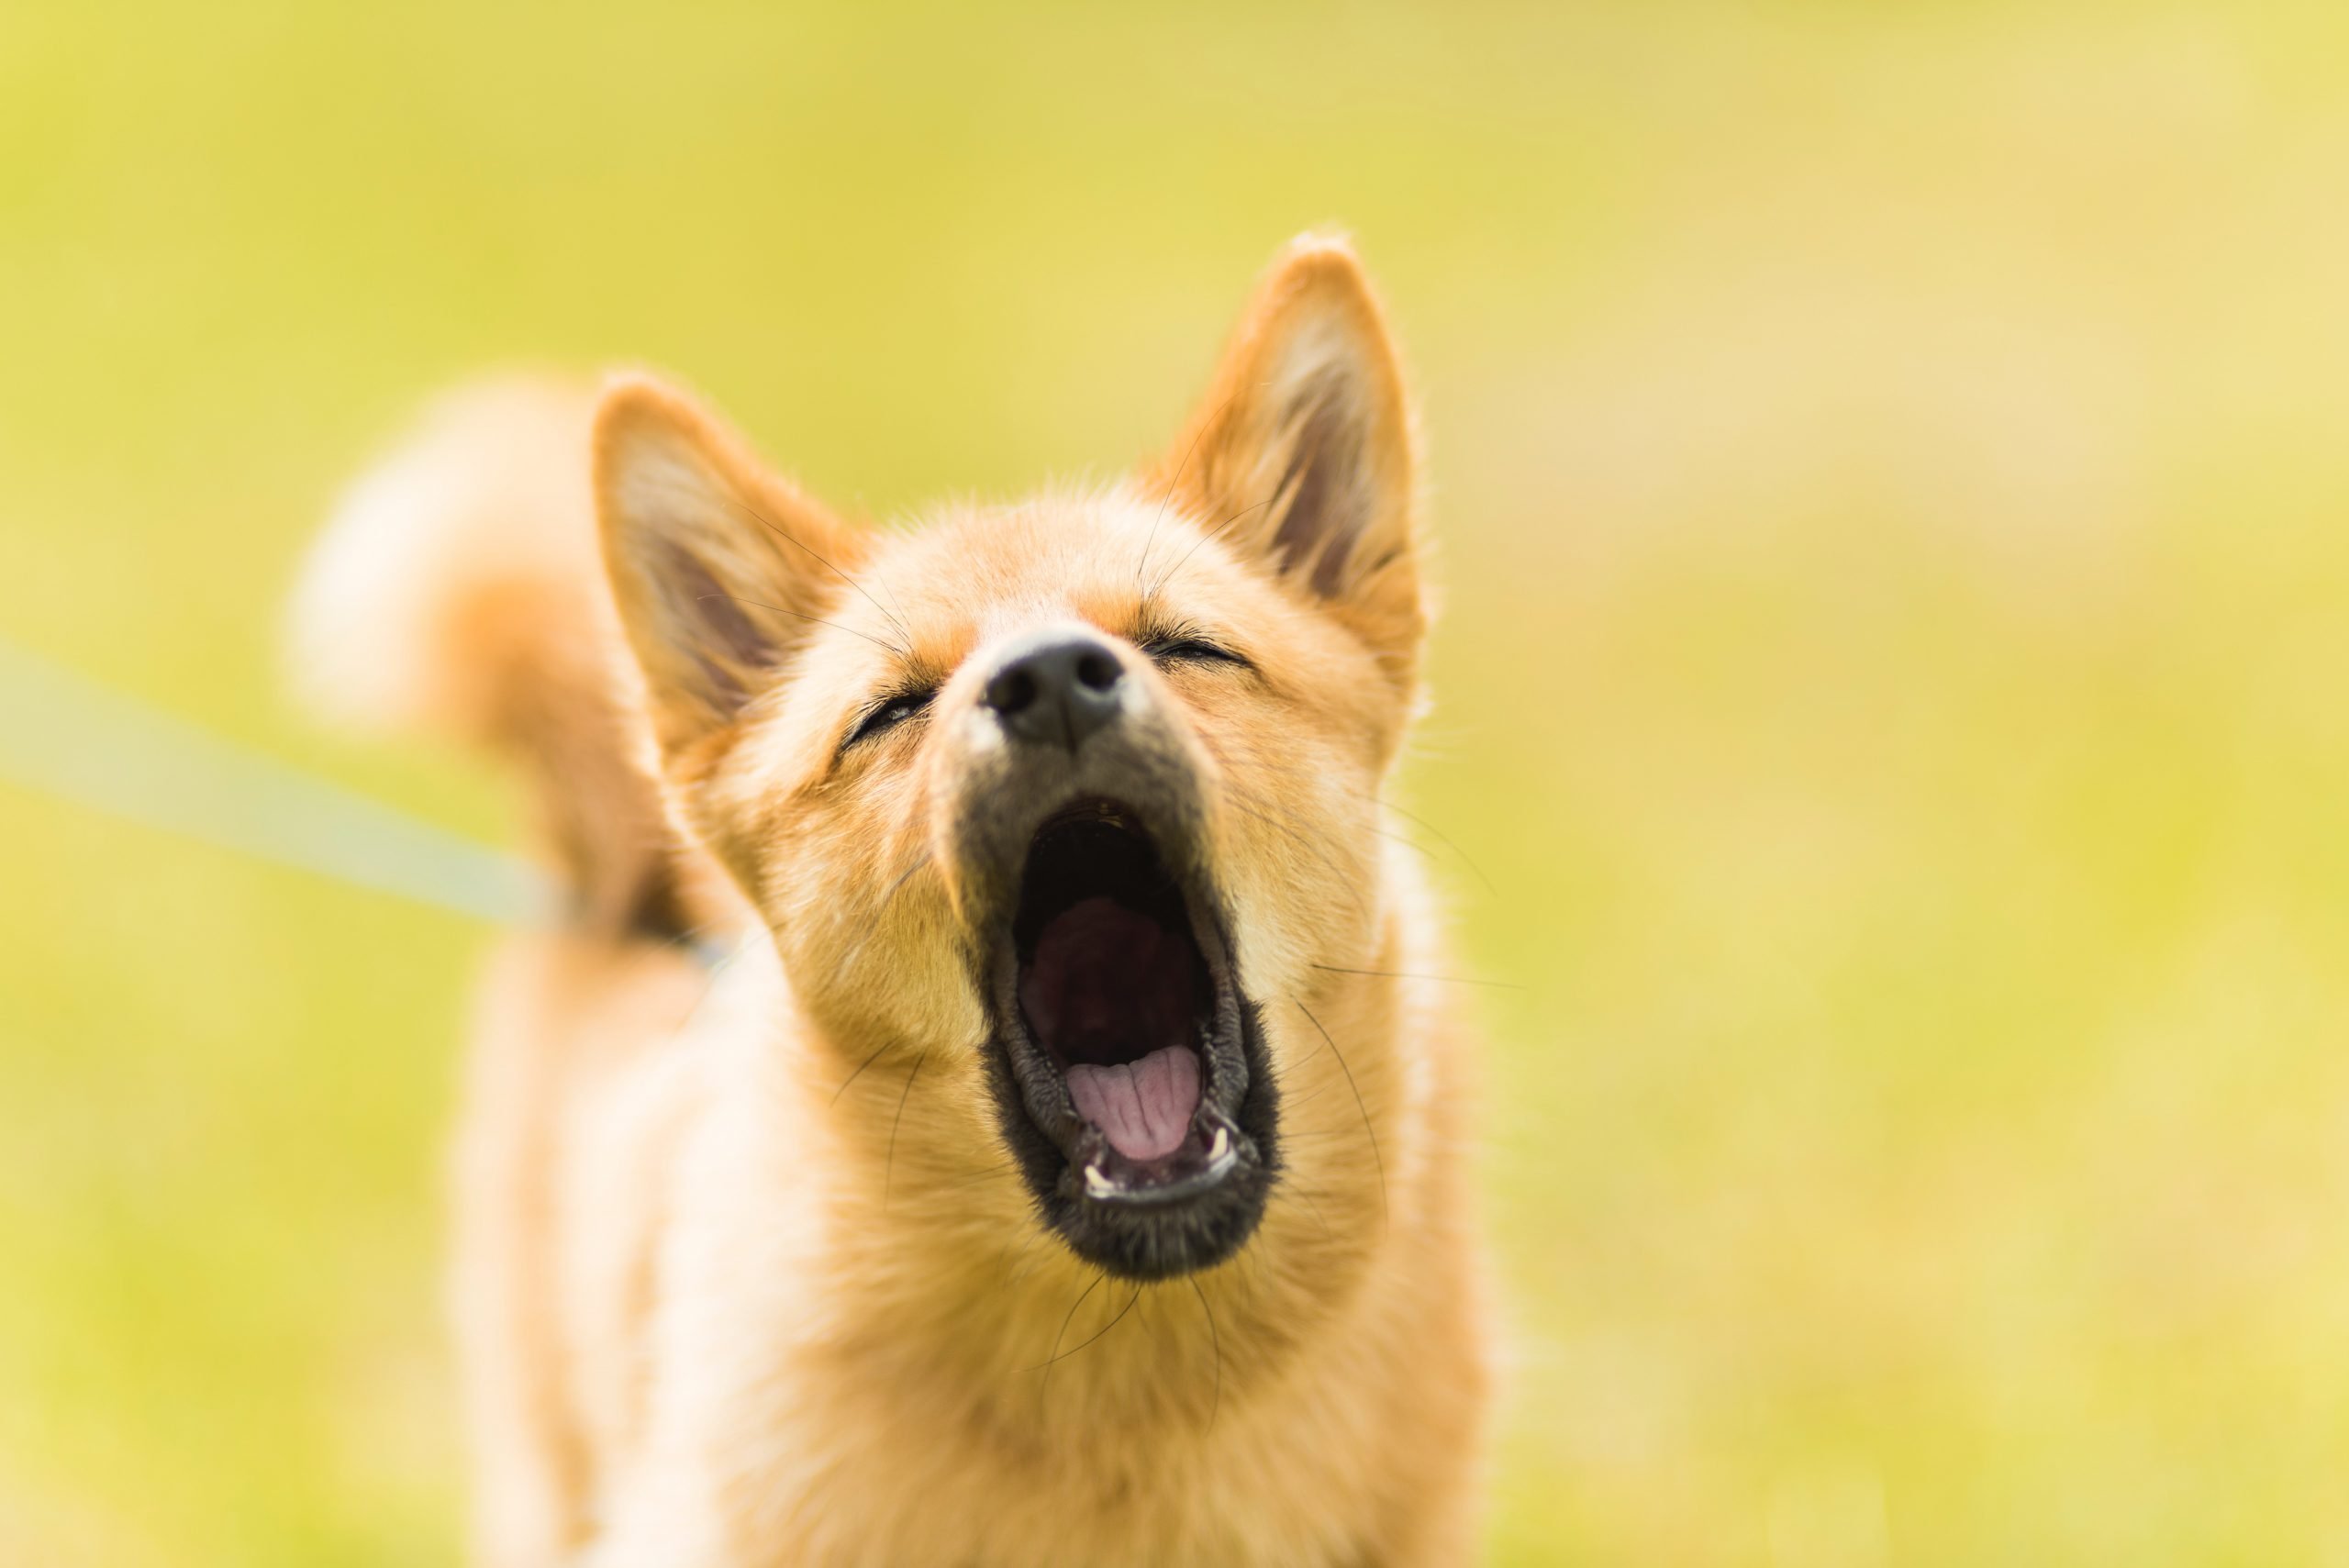 How to Stop Your Dog From Barking When Left Alone